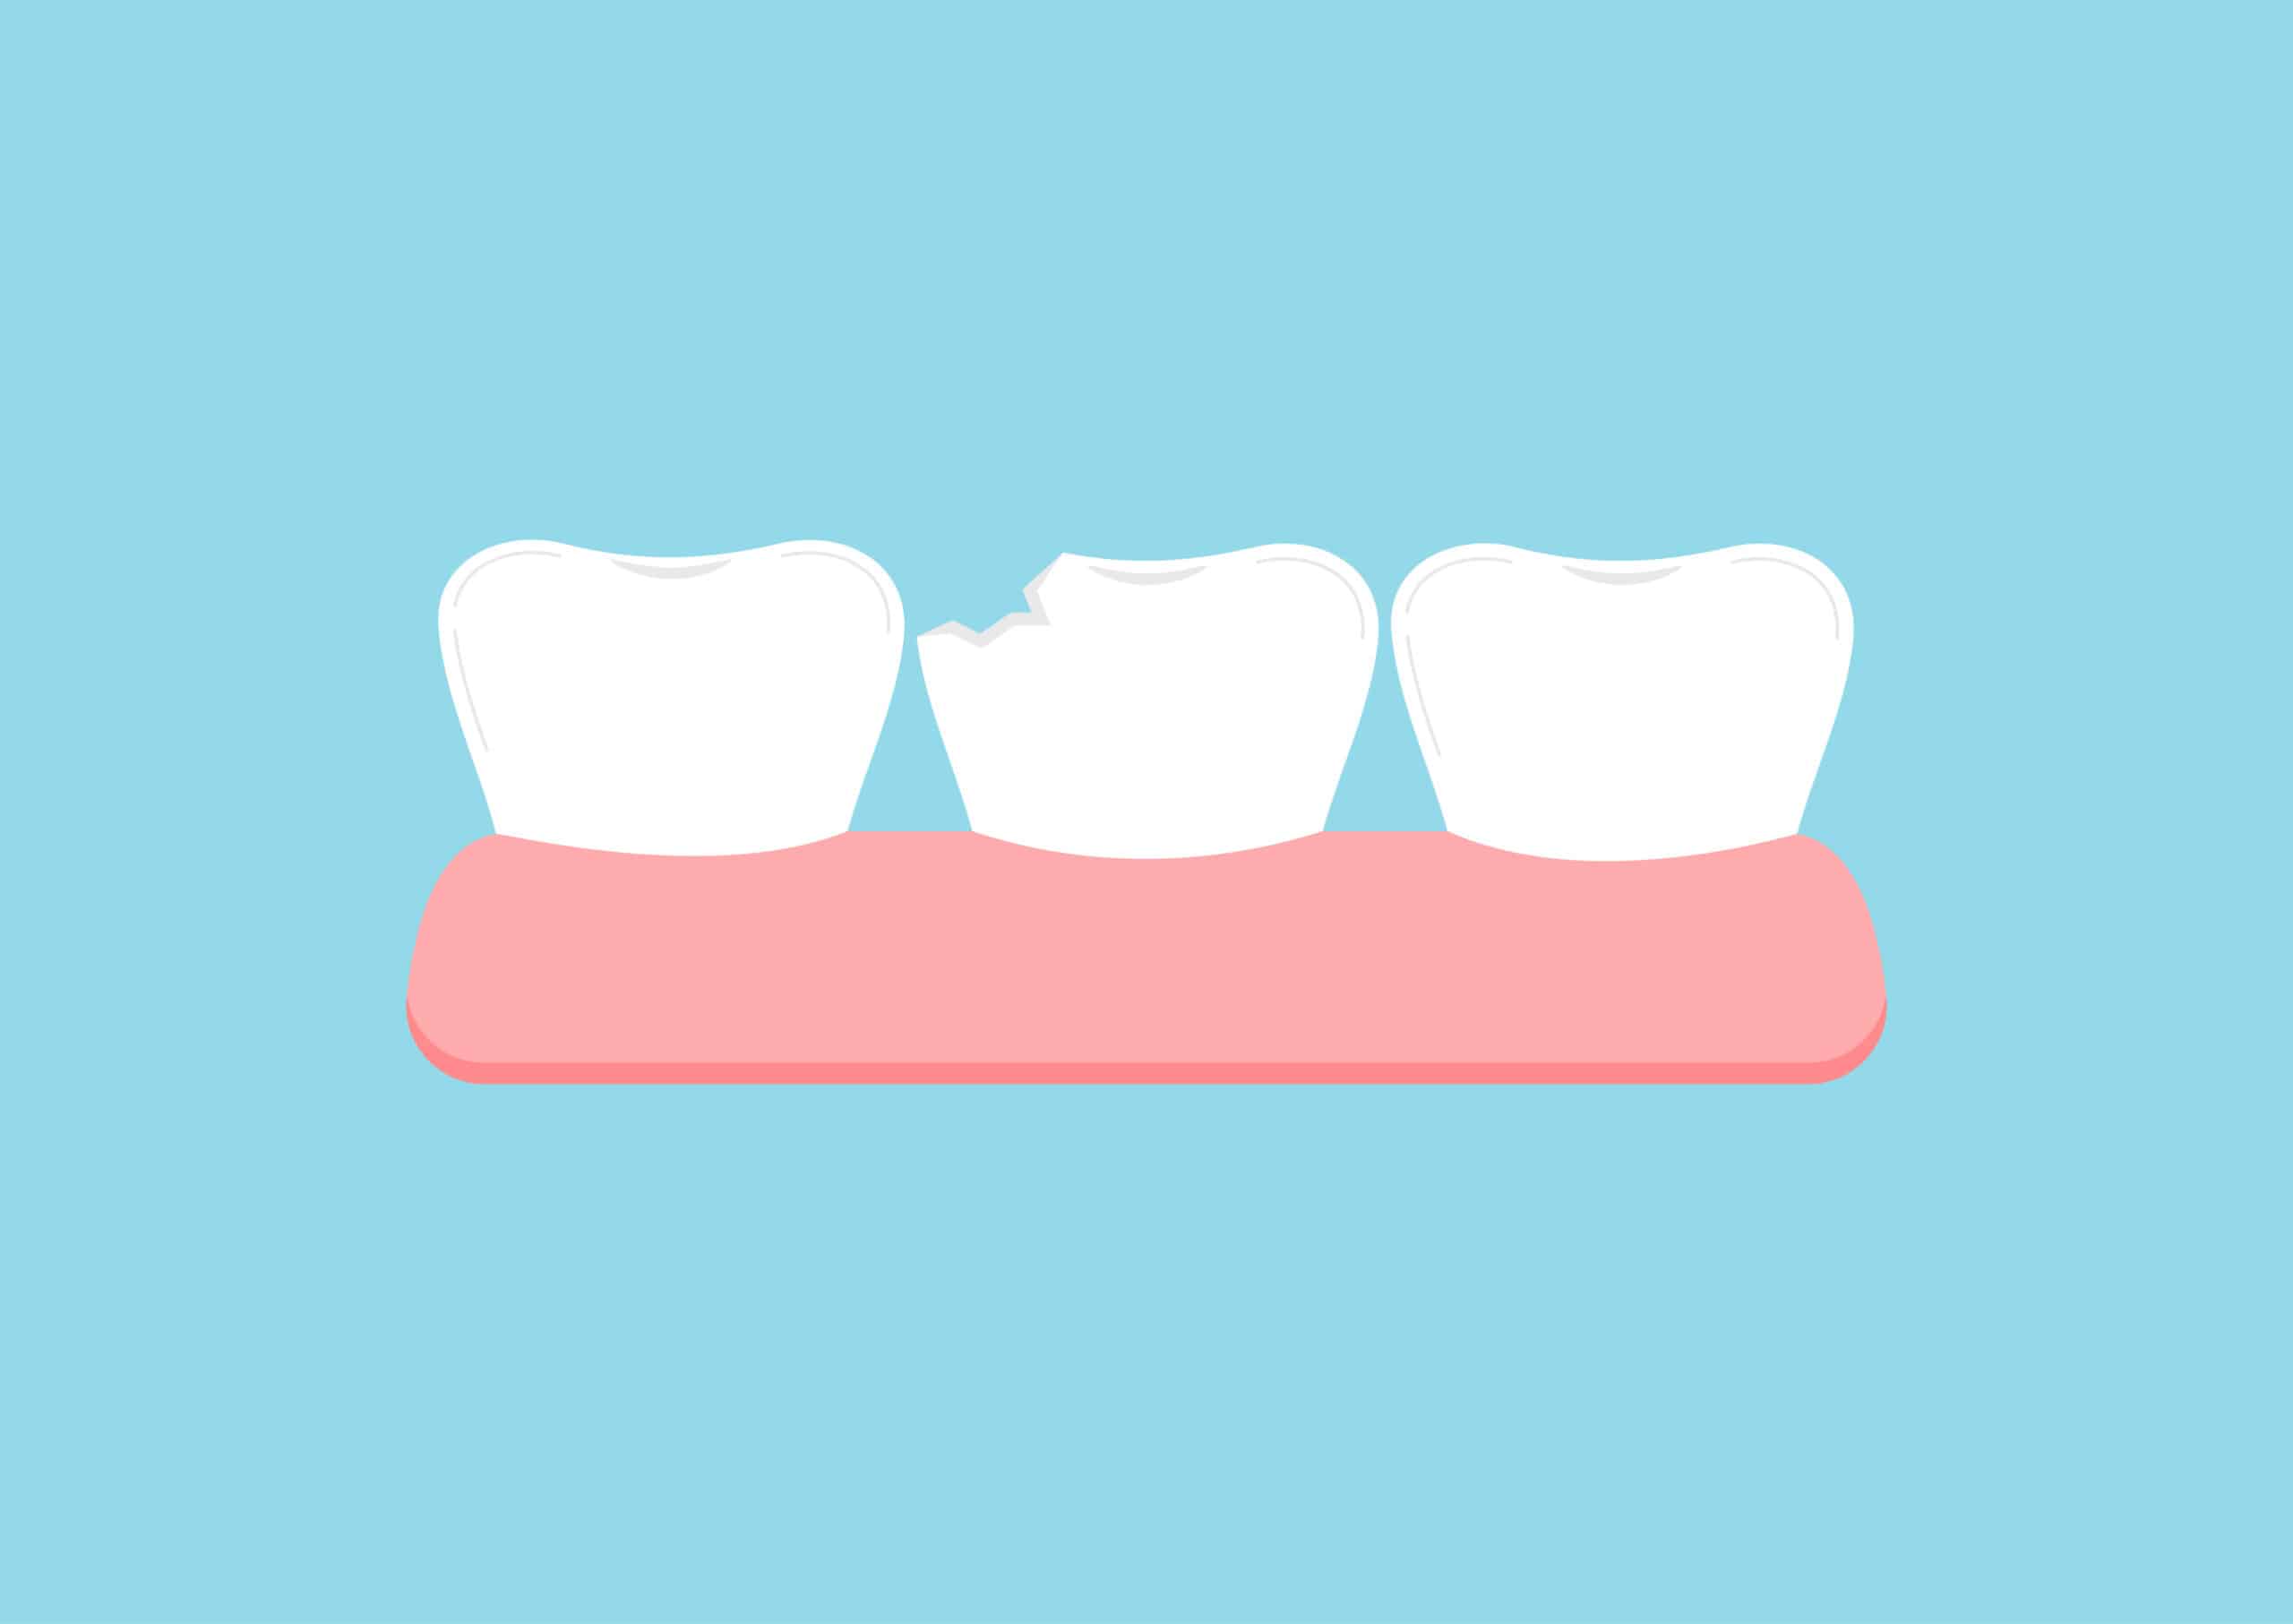 Chipped tooth in gum icon isolated on blue background.